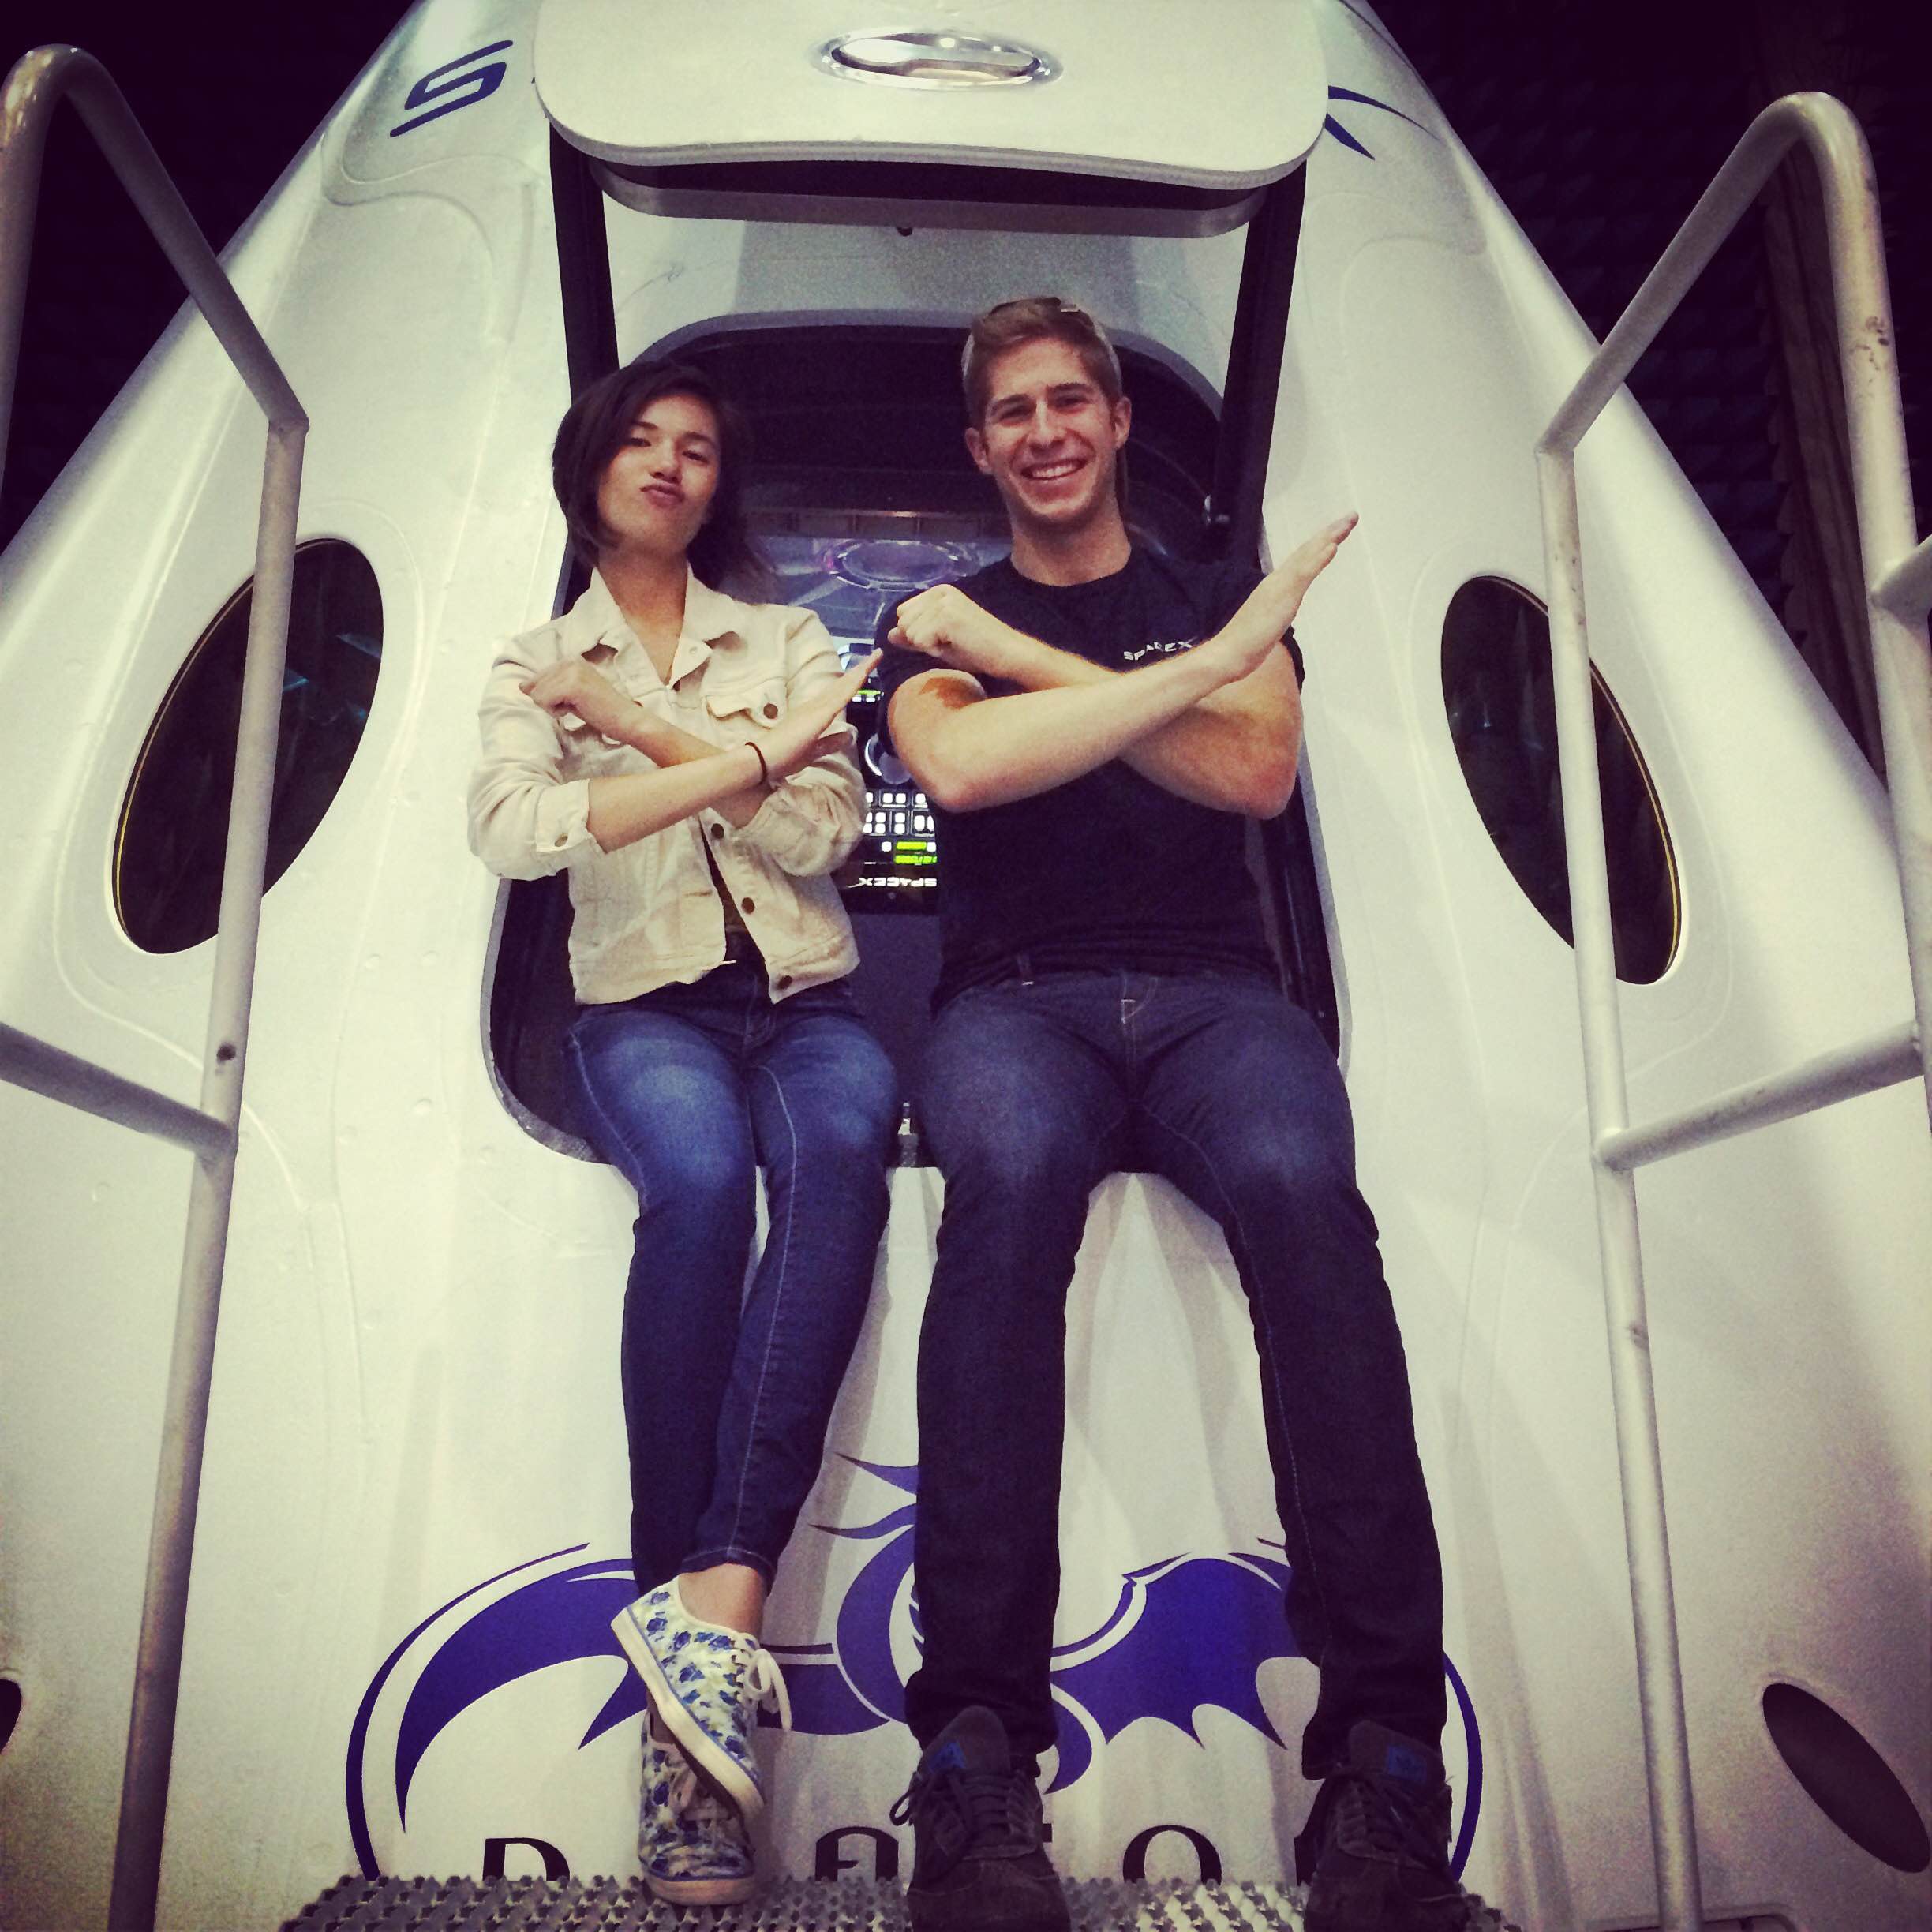 Kelly Thomas, left, and a SpaceX colleague making the spaceX sign with their arms and sitting on the entrance of the spaceX craft